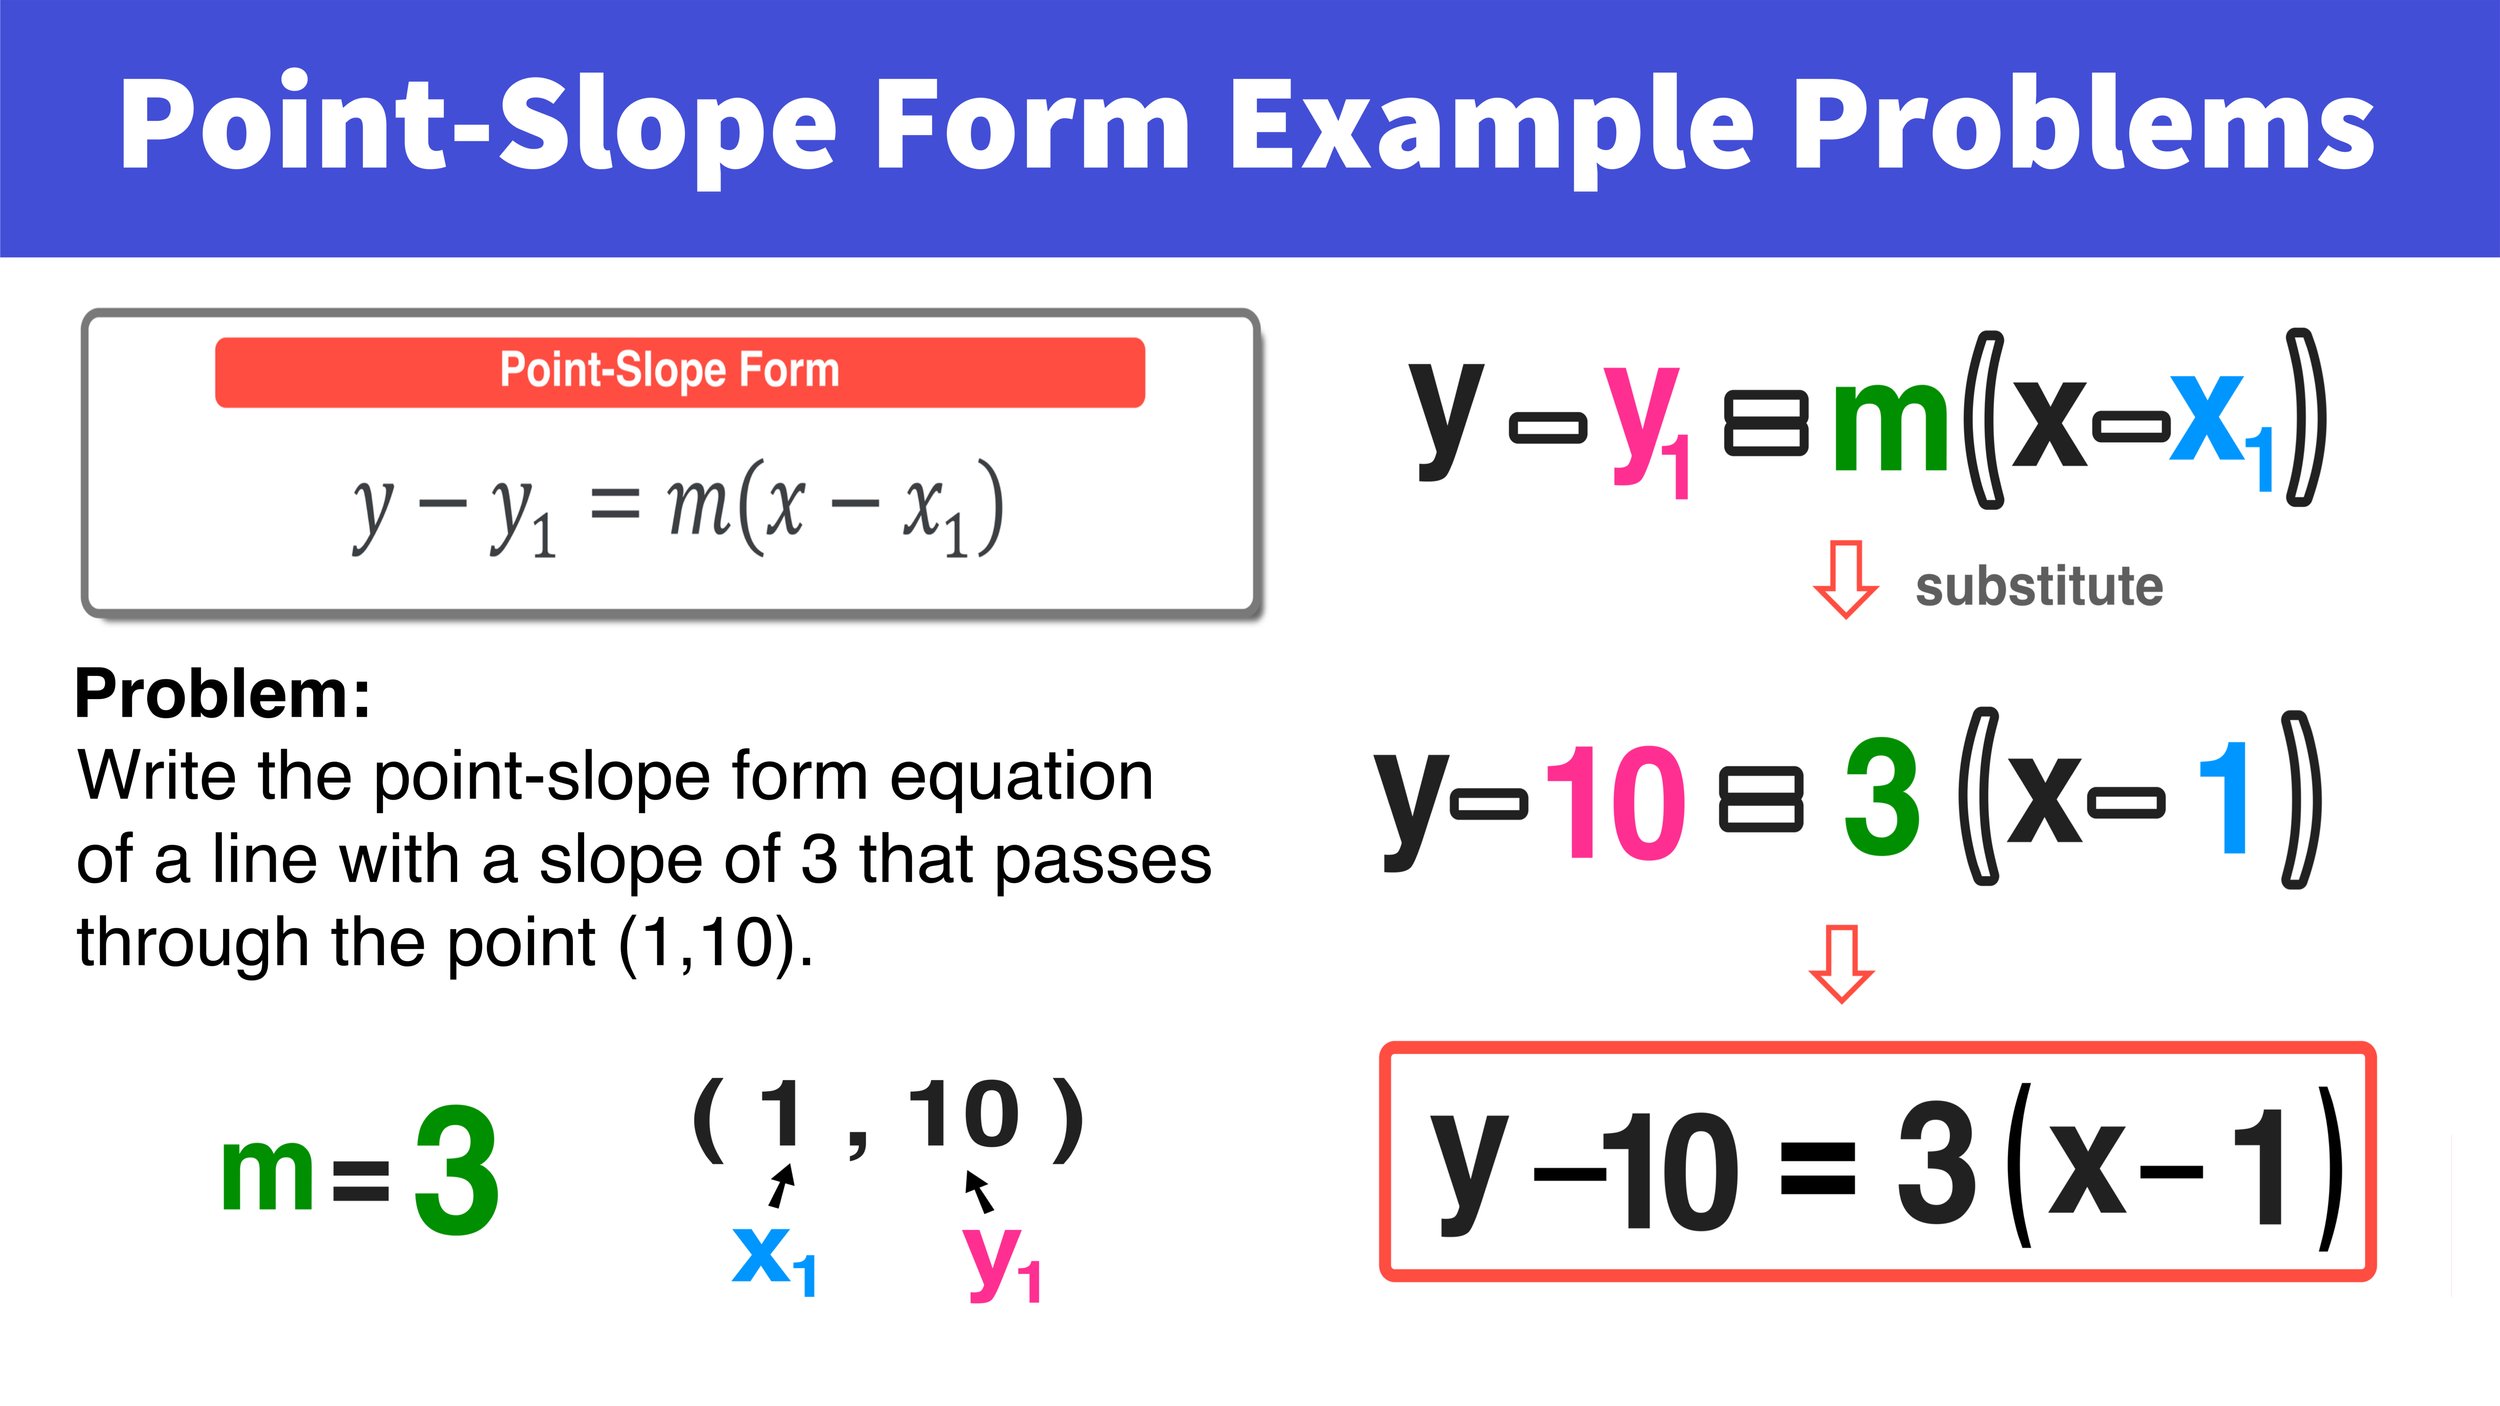 PROB Function - Definition, Formula, Example, Use